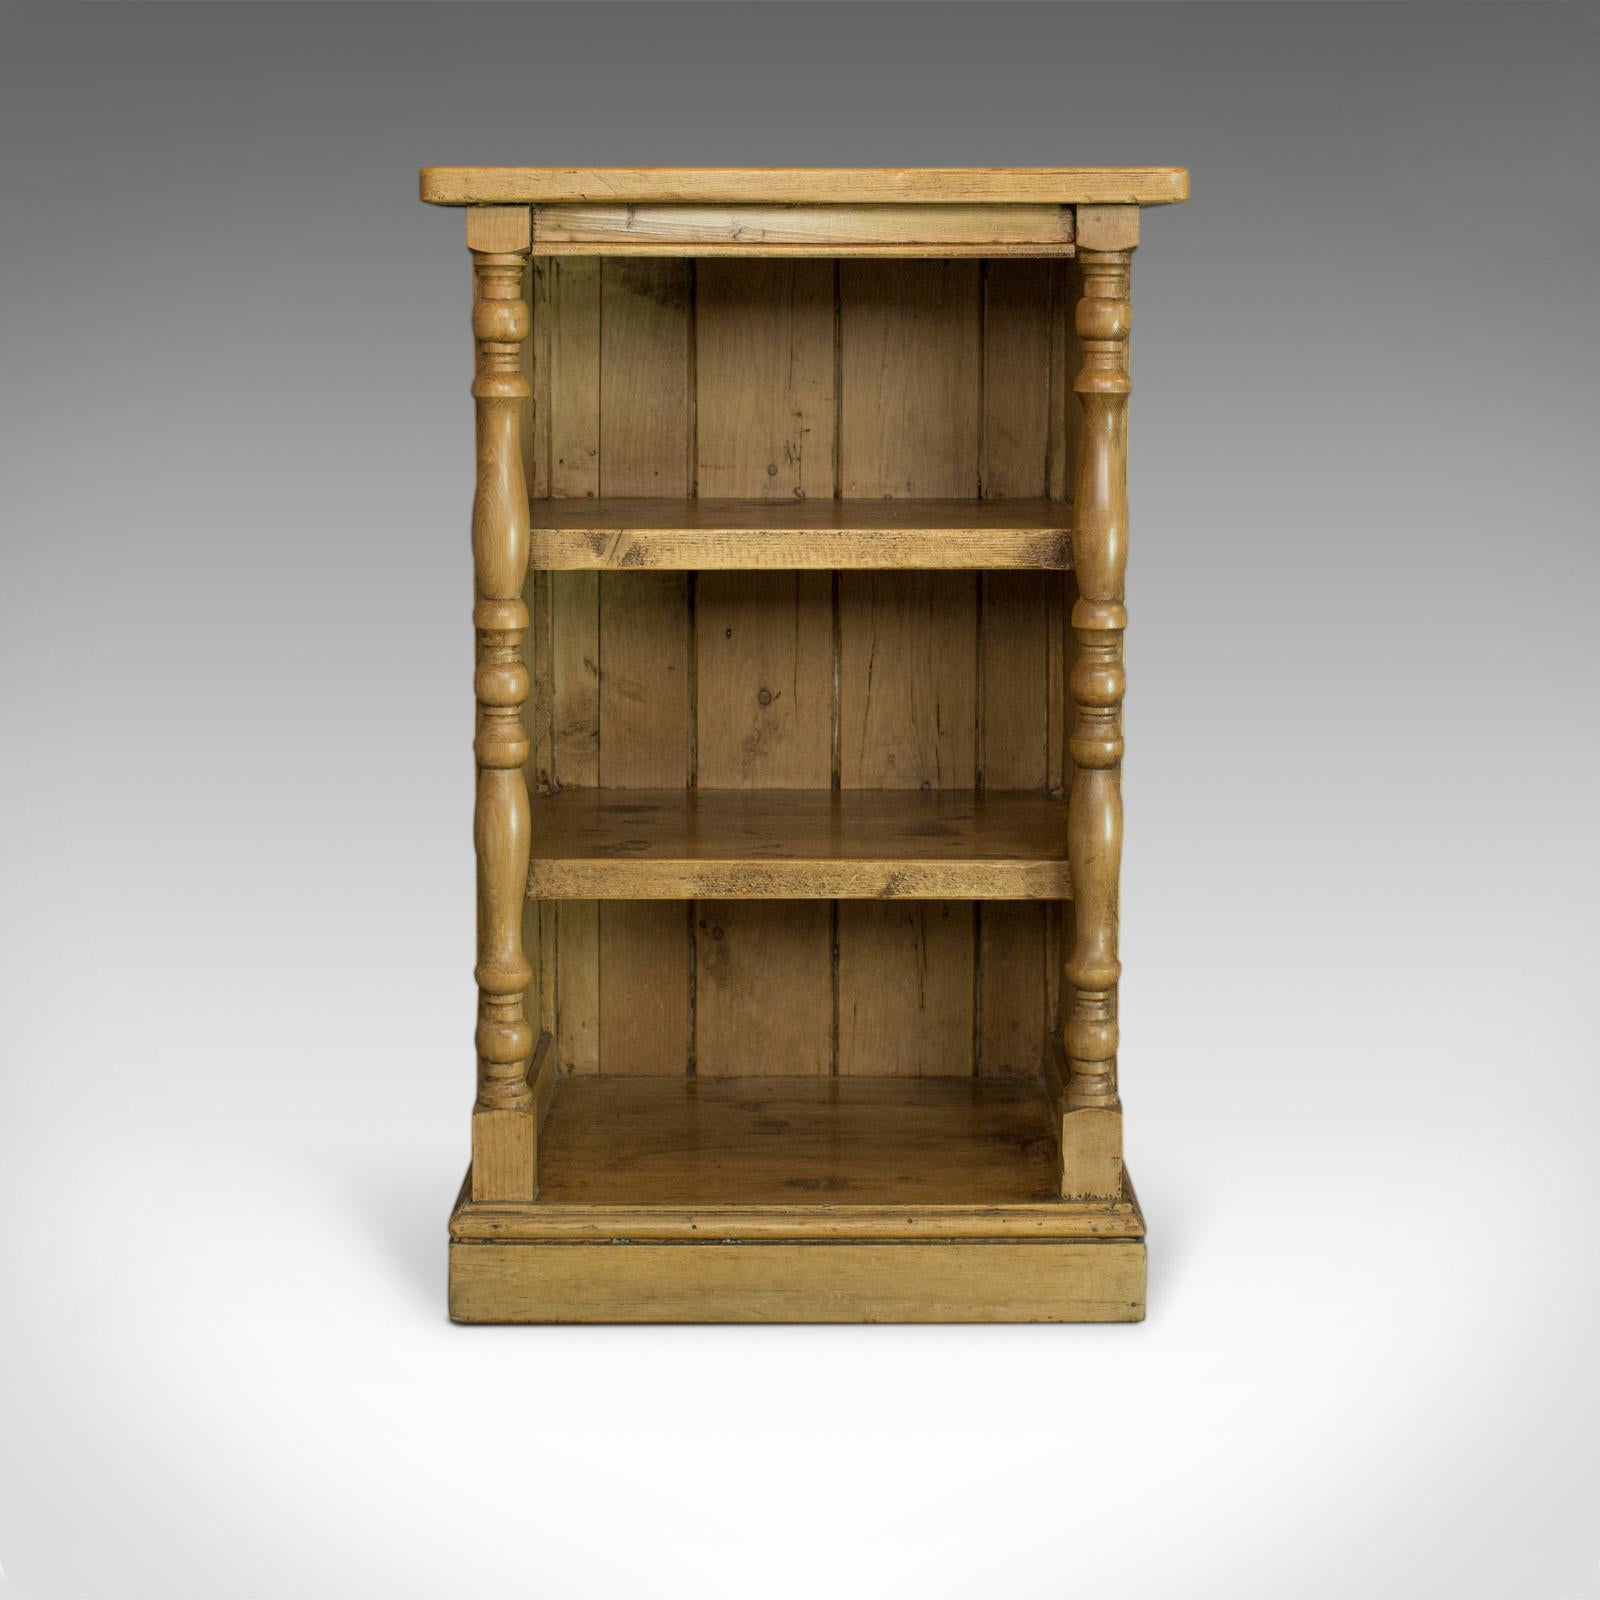 This is an antique pine open bookcase. A narrow, English, Victorian bookshelf dating to the late 19th century, circa 1900.

Select pine panels display warm caramel hues and fine grain interest
Pleasing Victorian country styling with a desirable